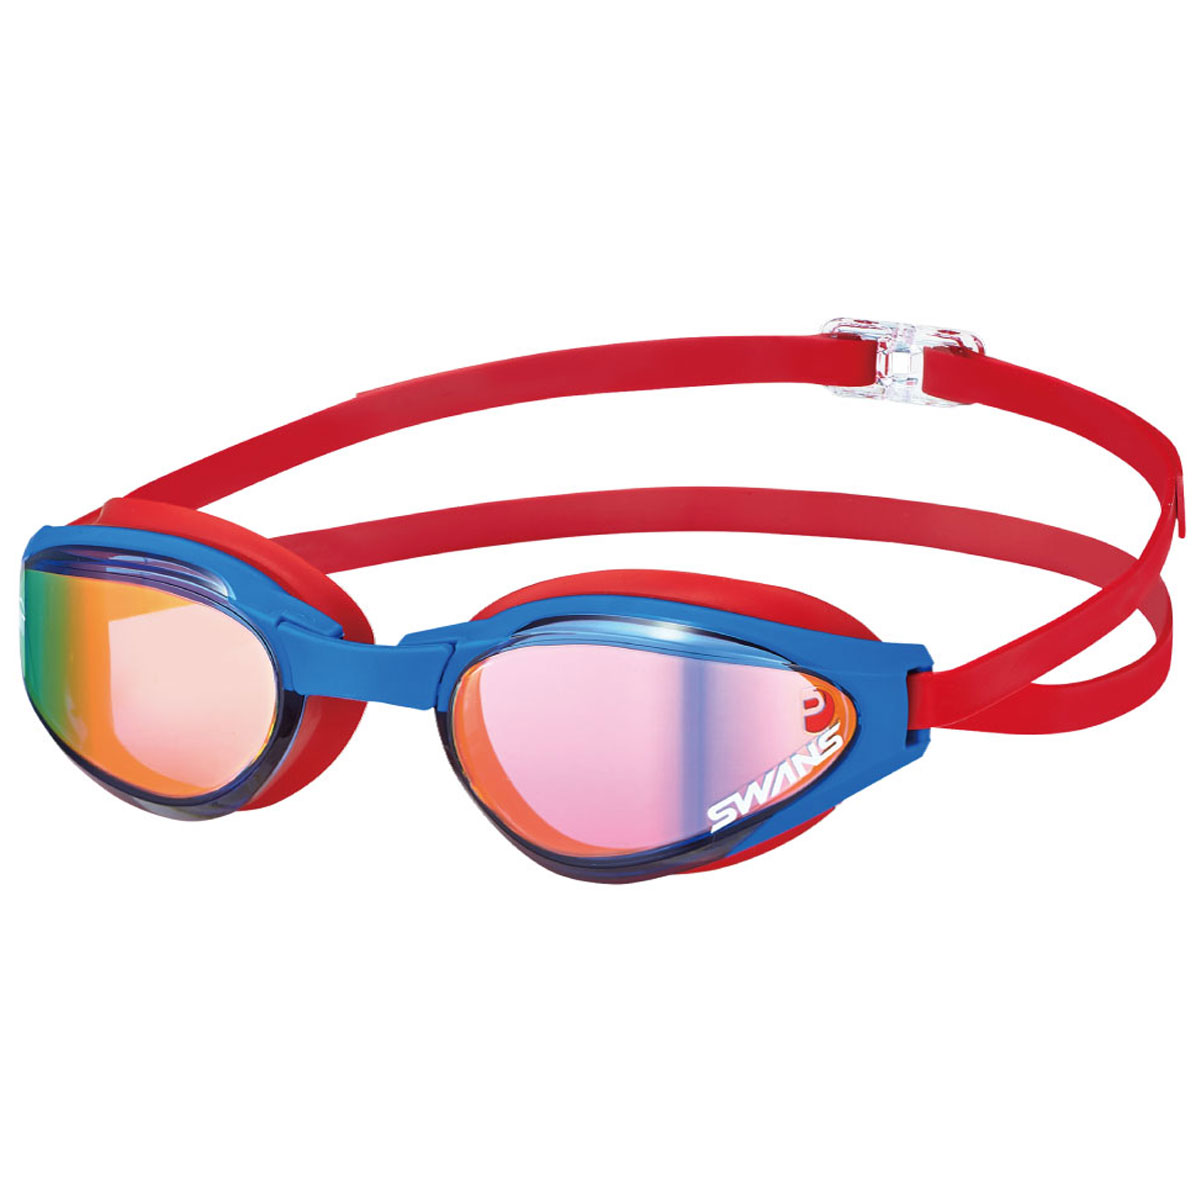 Swans SR81 Ascender MIT Mirrored Goggles - Blue / Red